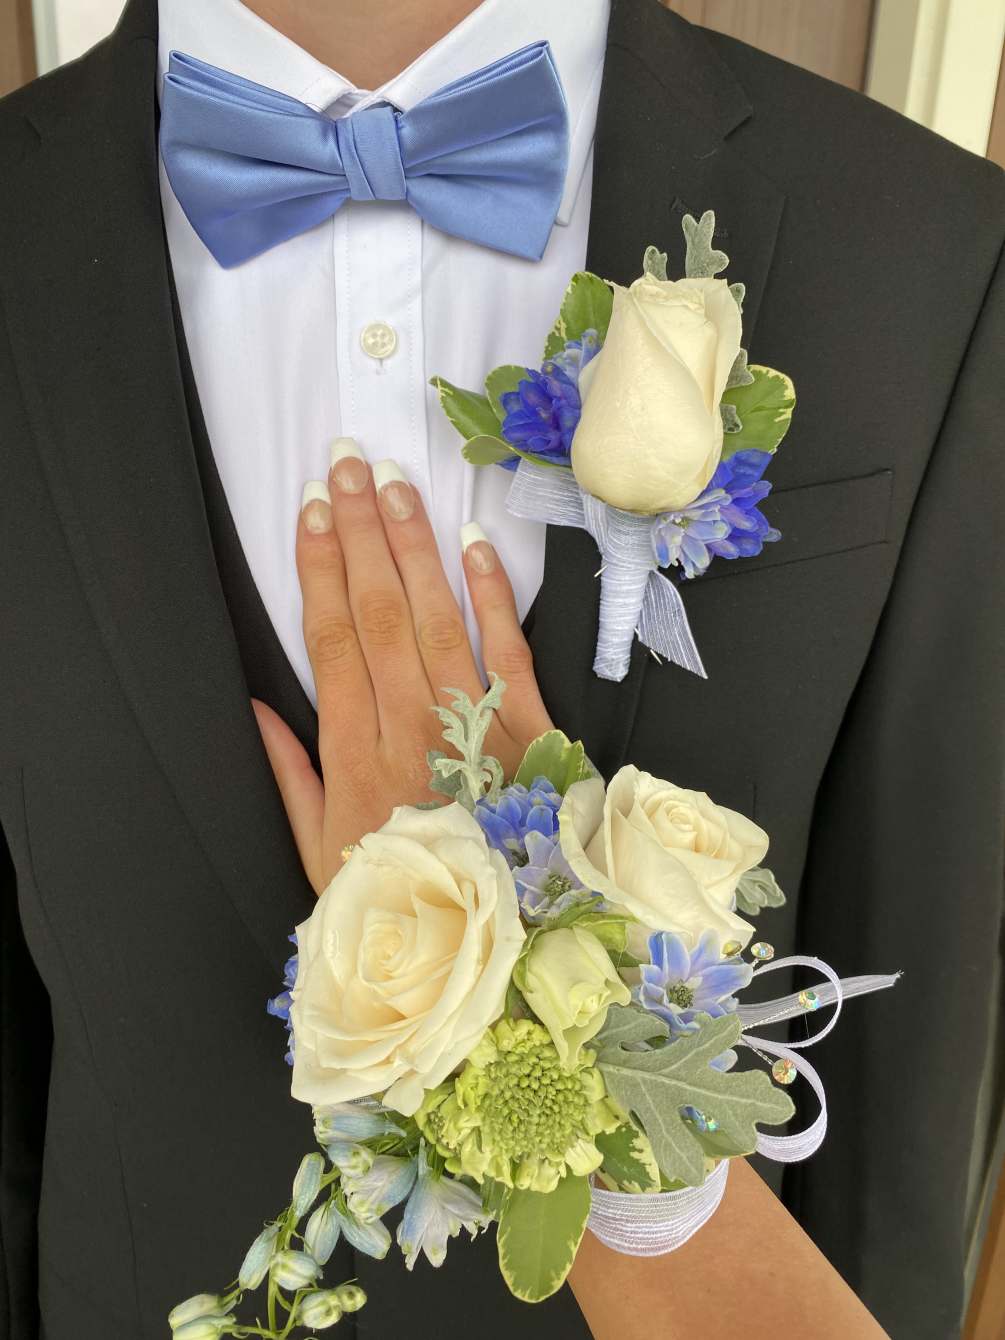 Elegant white roses with blue delphiniums and mixed greens. This is a